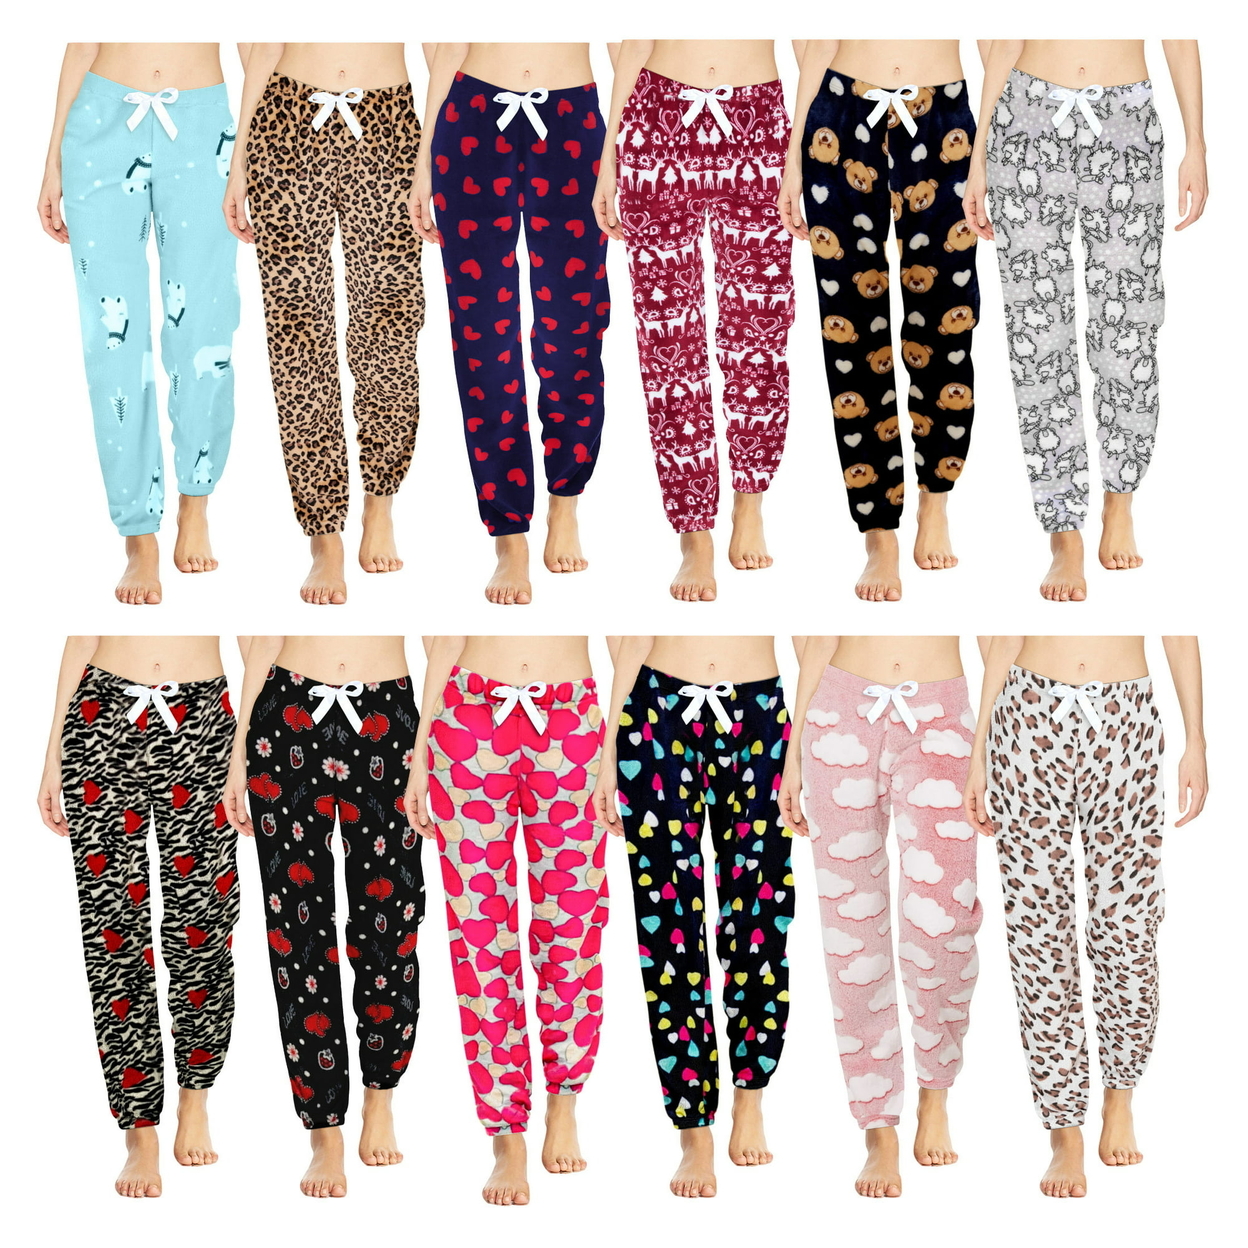 4-Pack: Women's Printed Ultra-Soft Comfy Stretch Micro-Fleece Pajama Lounge Pants - Small, Love